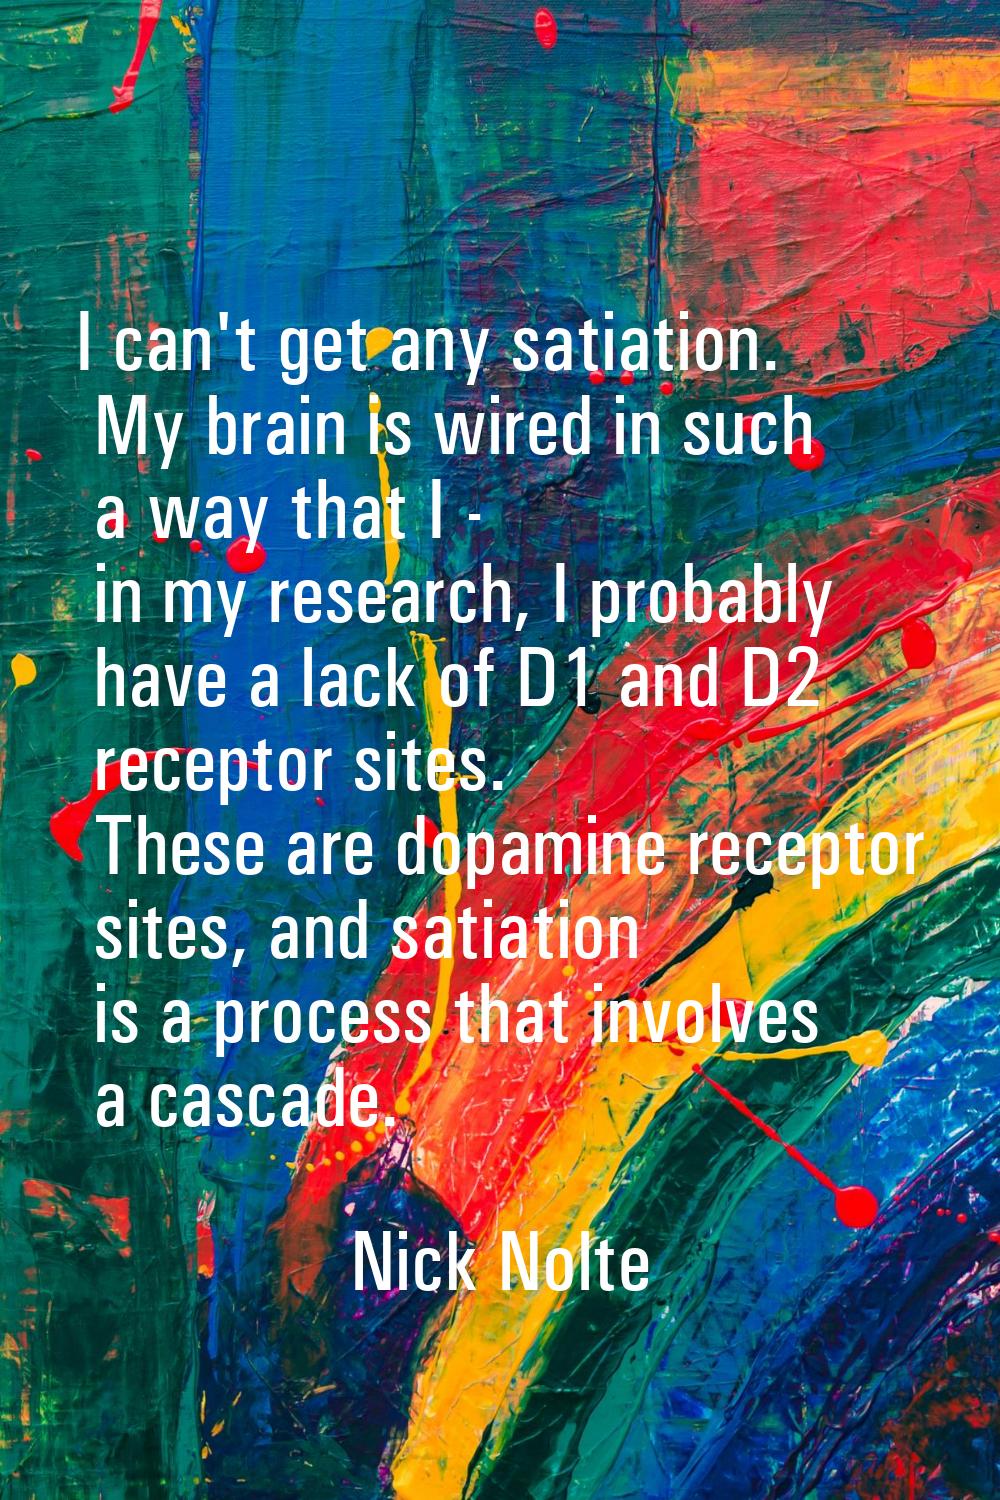 I can't get any satiation. My brain is wired in such a way that I - in my research, I probably have